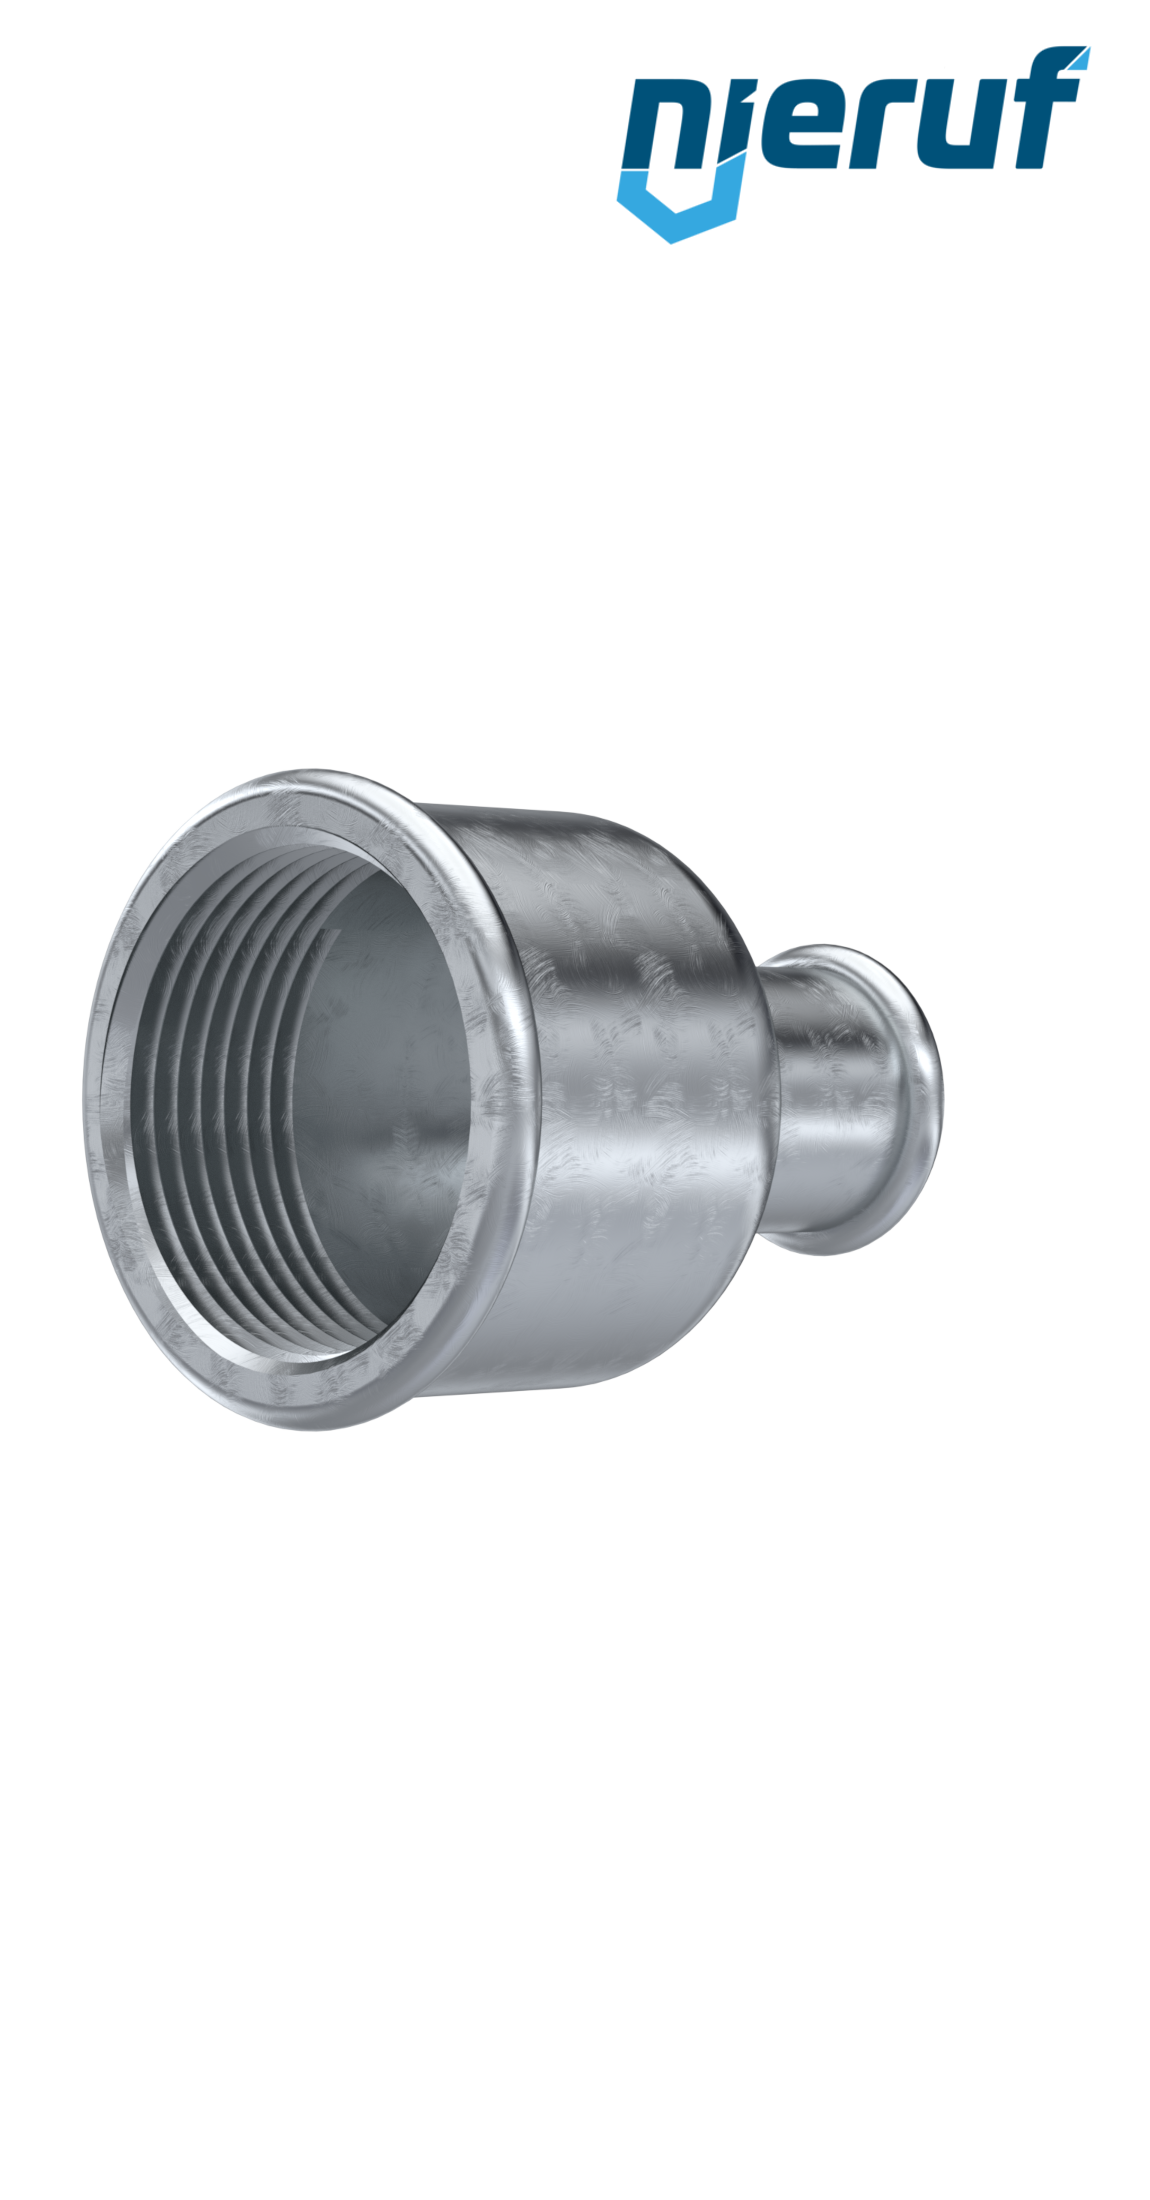 Malleable cast iron fitting reducing socket no. 240, 1 1/4" x 3/4" inch galvanized